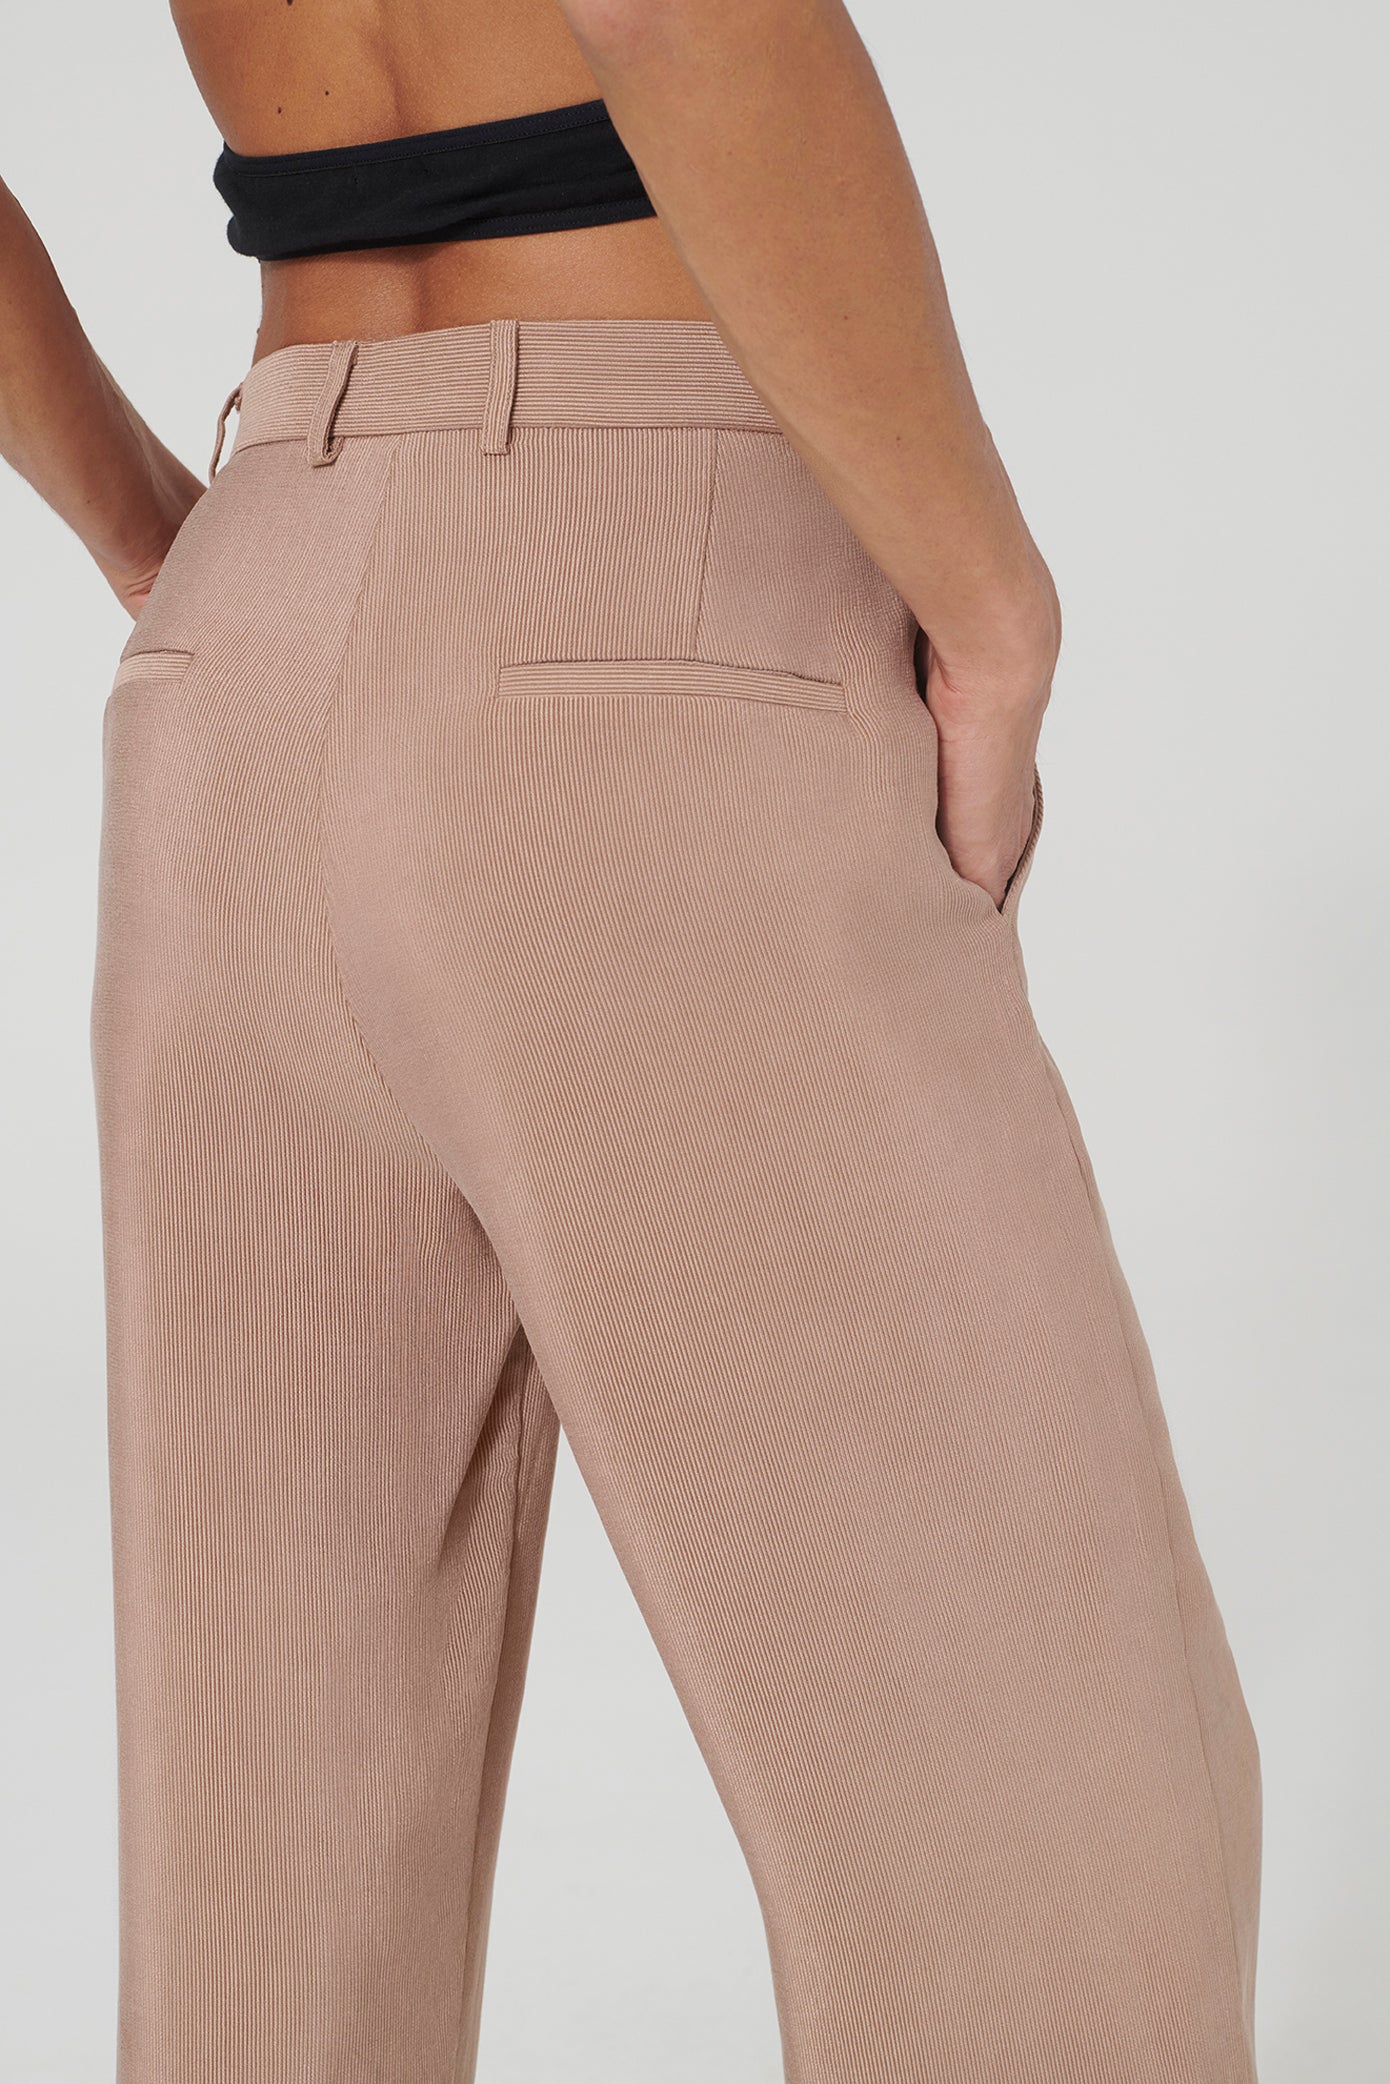 JEANNI rose-colored trousers by LOVJOI made of Ecovero™